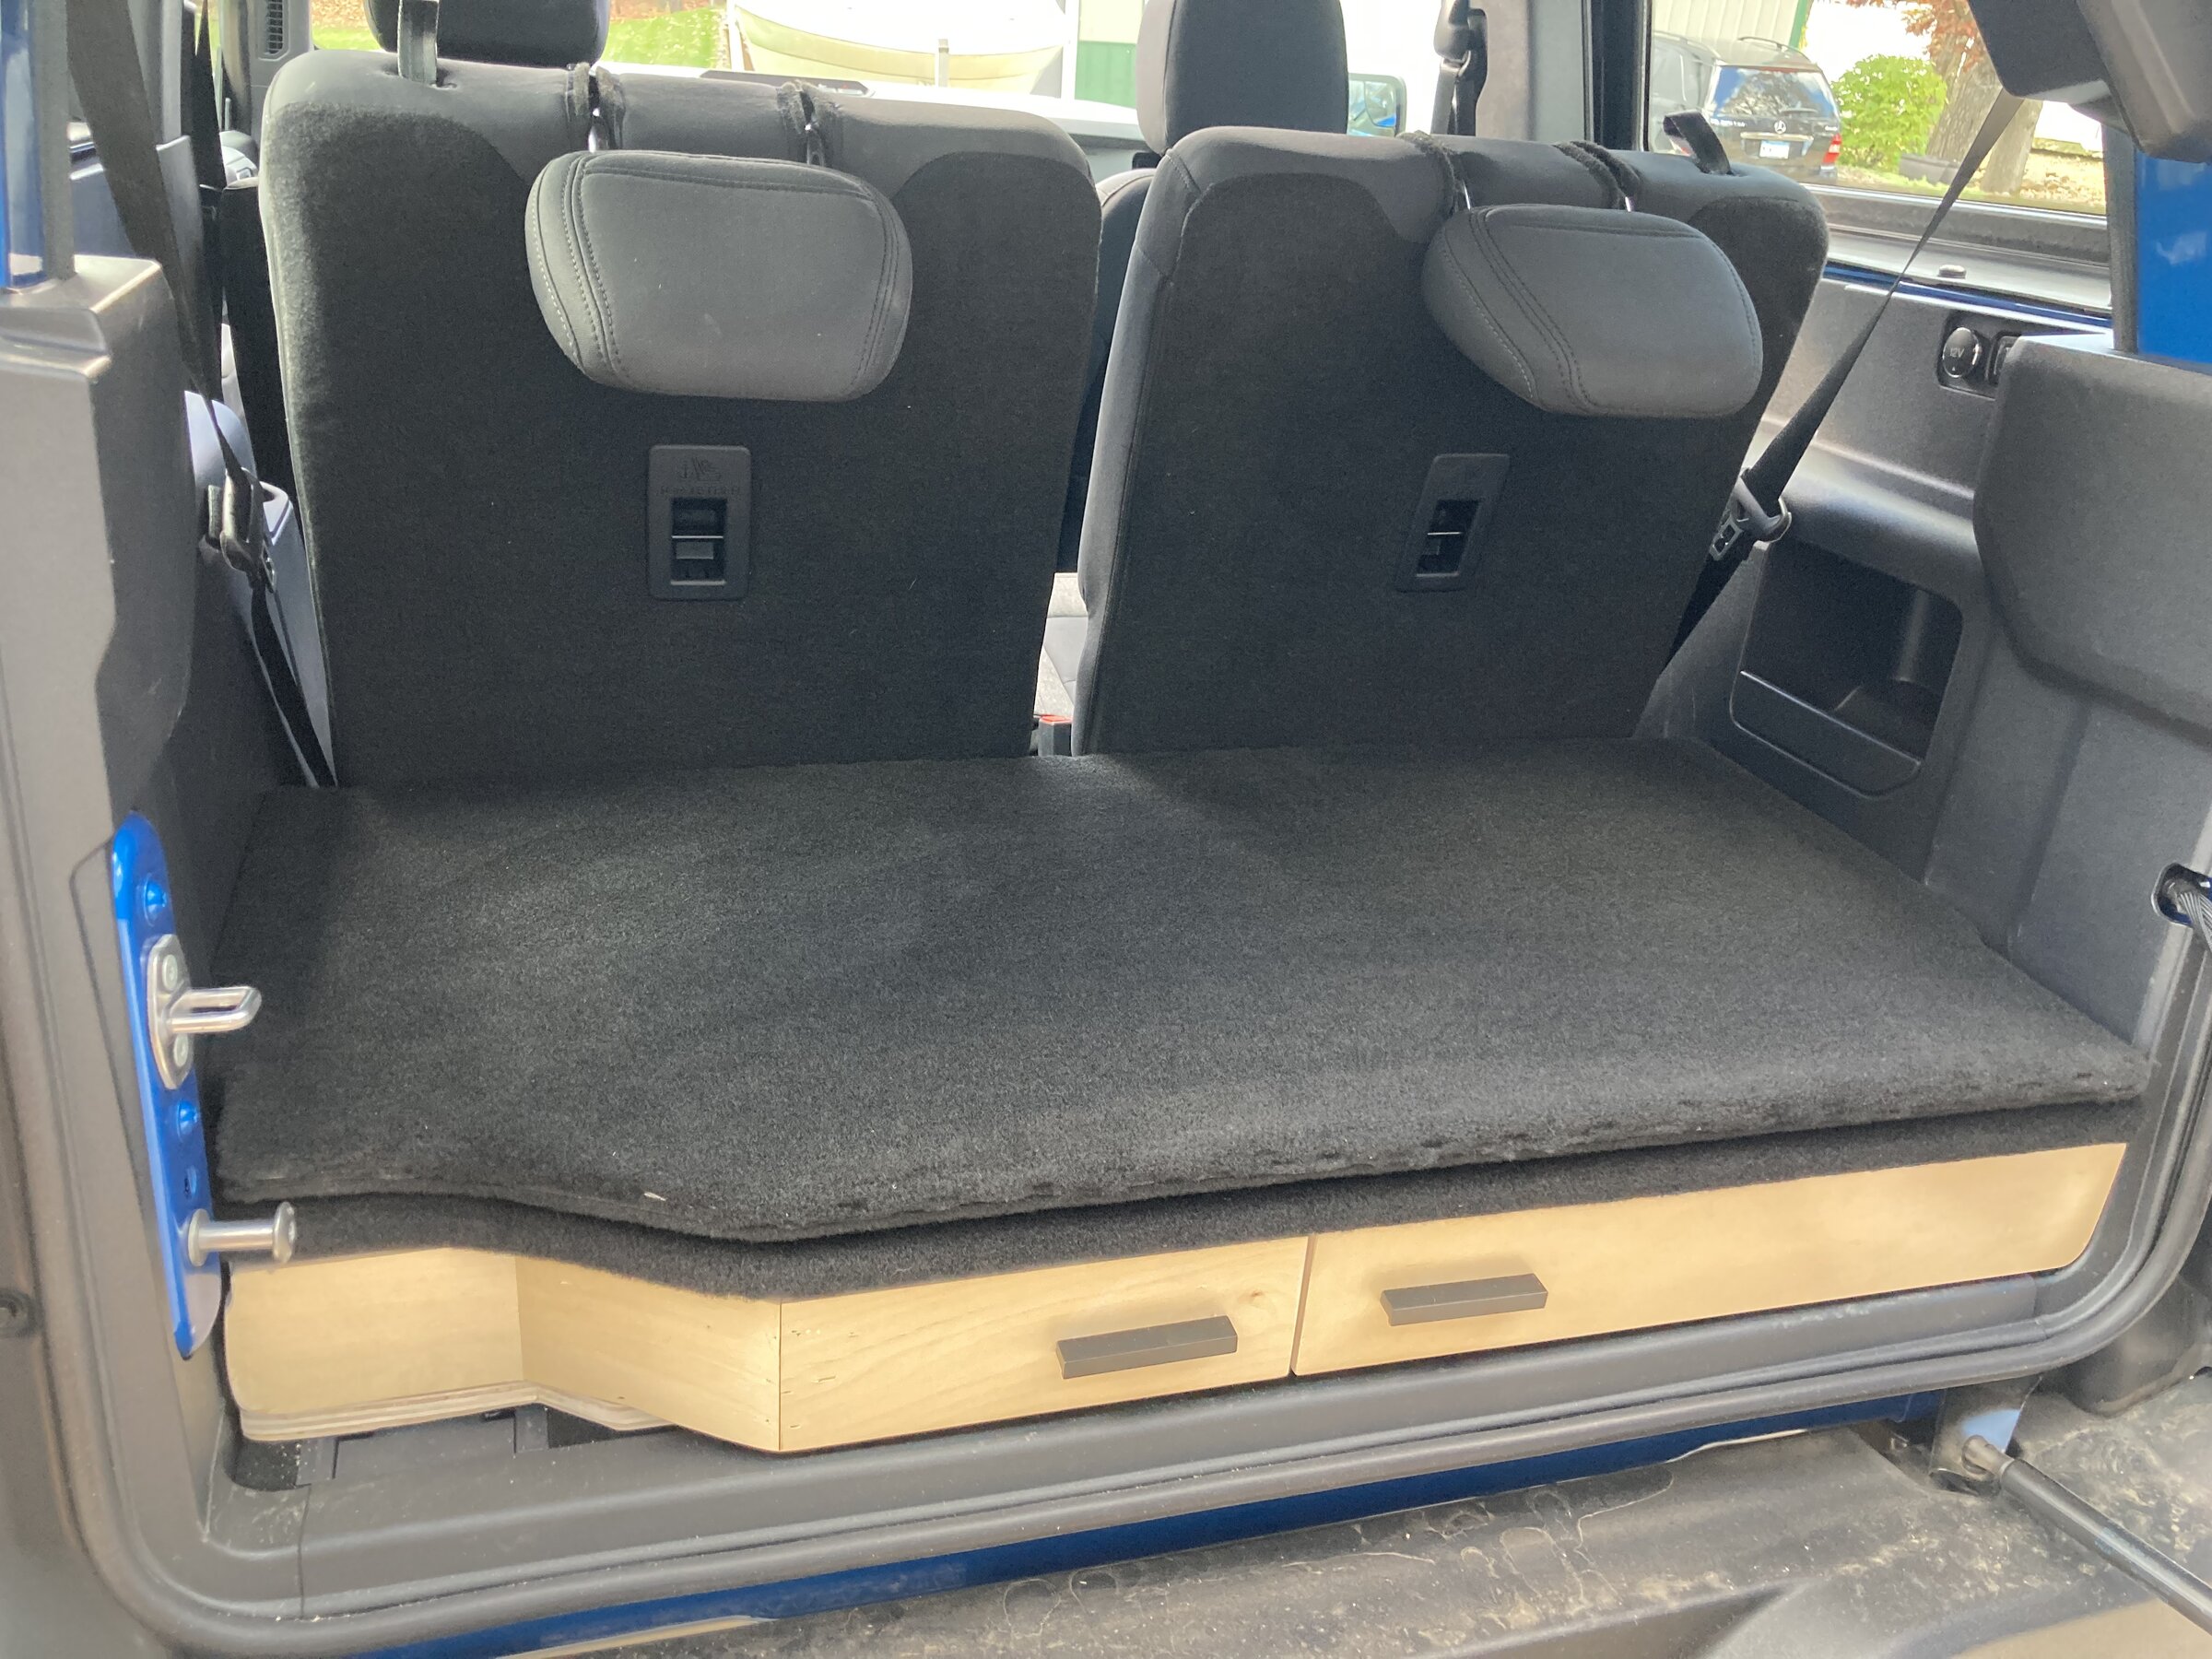 Ford Bronco Product idea for 2 doors - storage solution like the cargo drawer all Iphon pics 12-9-14 245.JPG